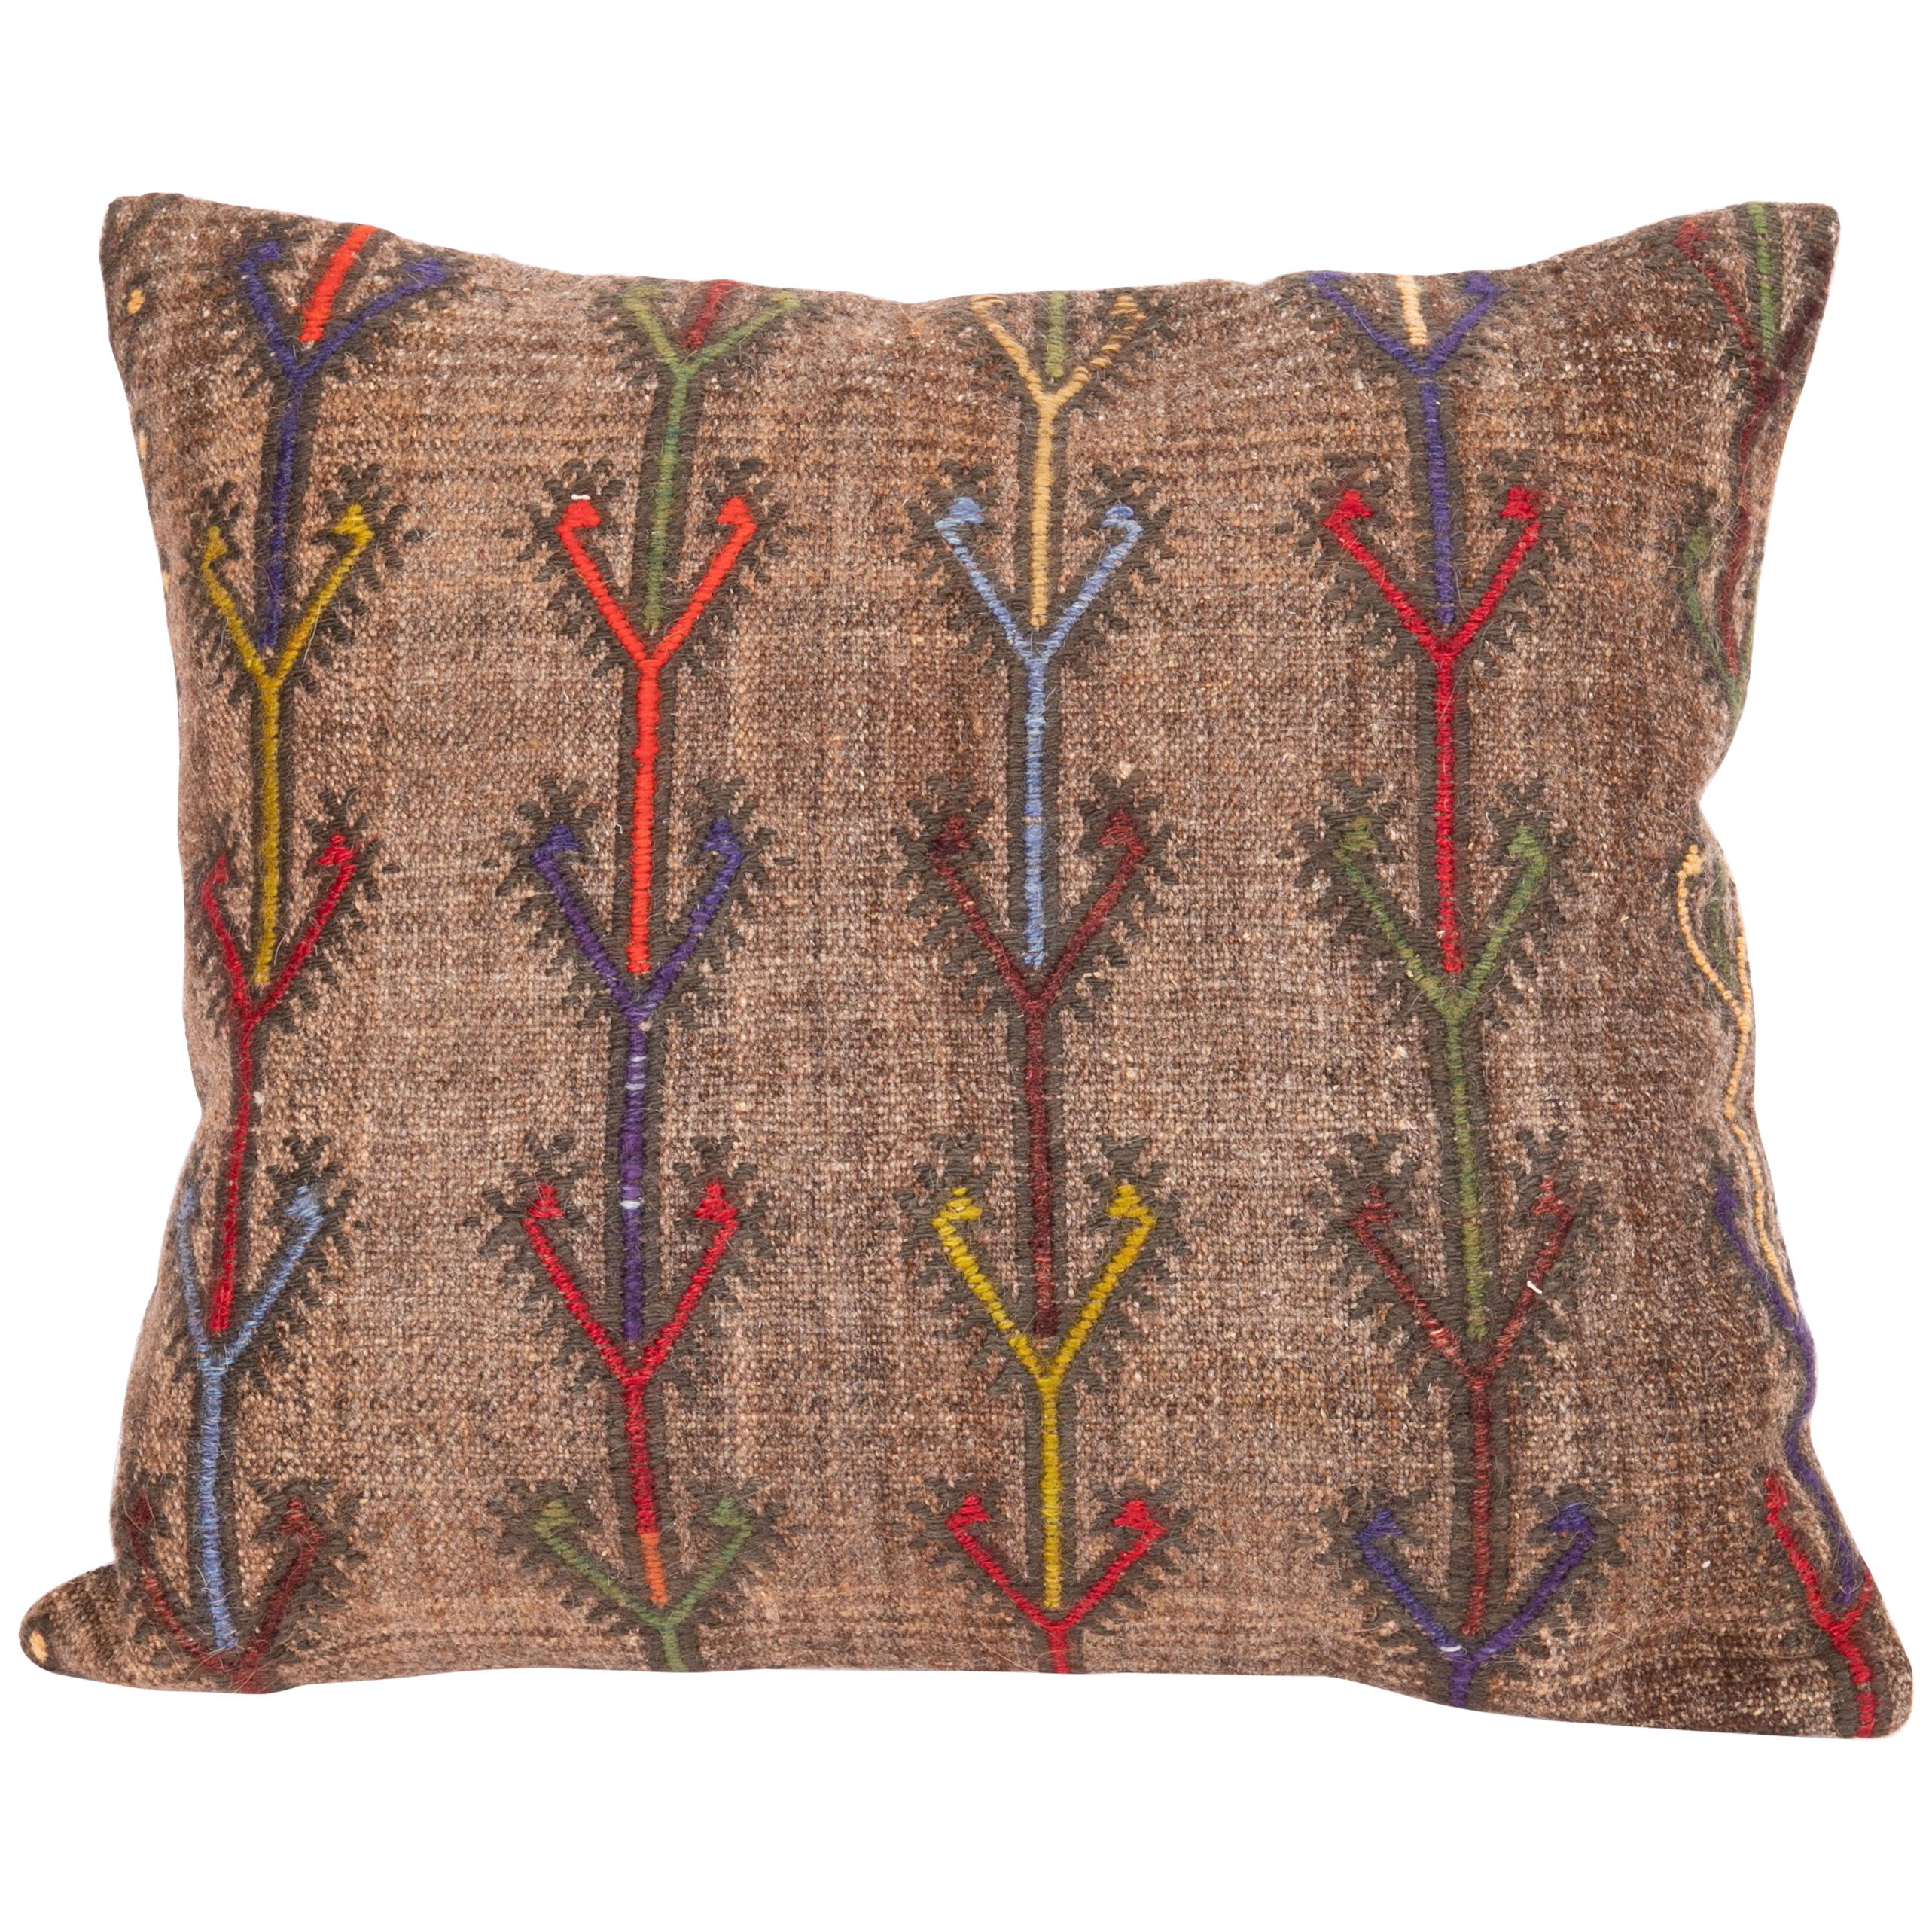 Wool Cicim Pillow Case Made from an Anatolian Cicim Kilim, Mid-20th Century